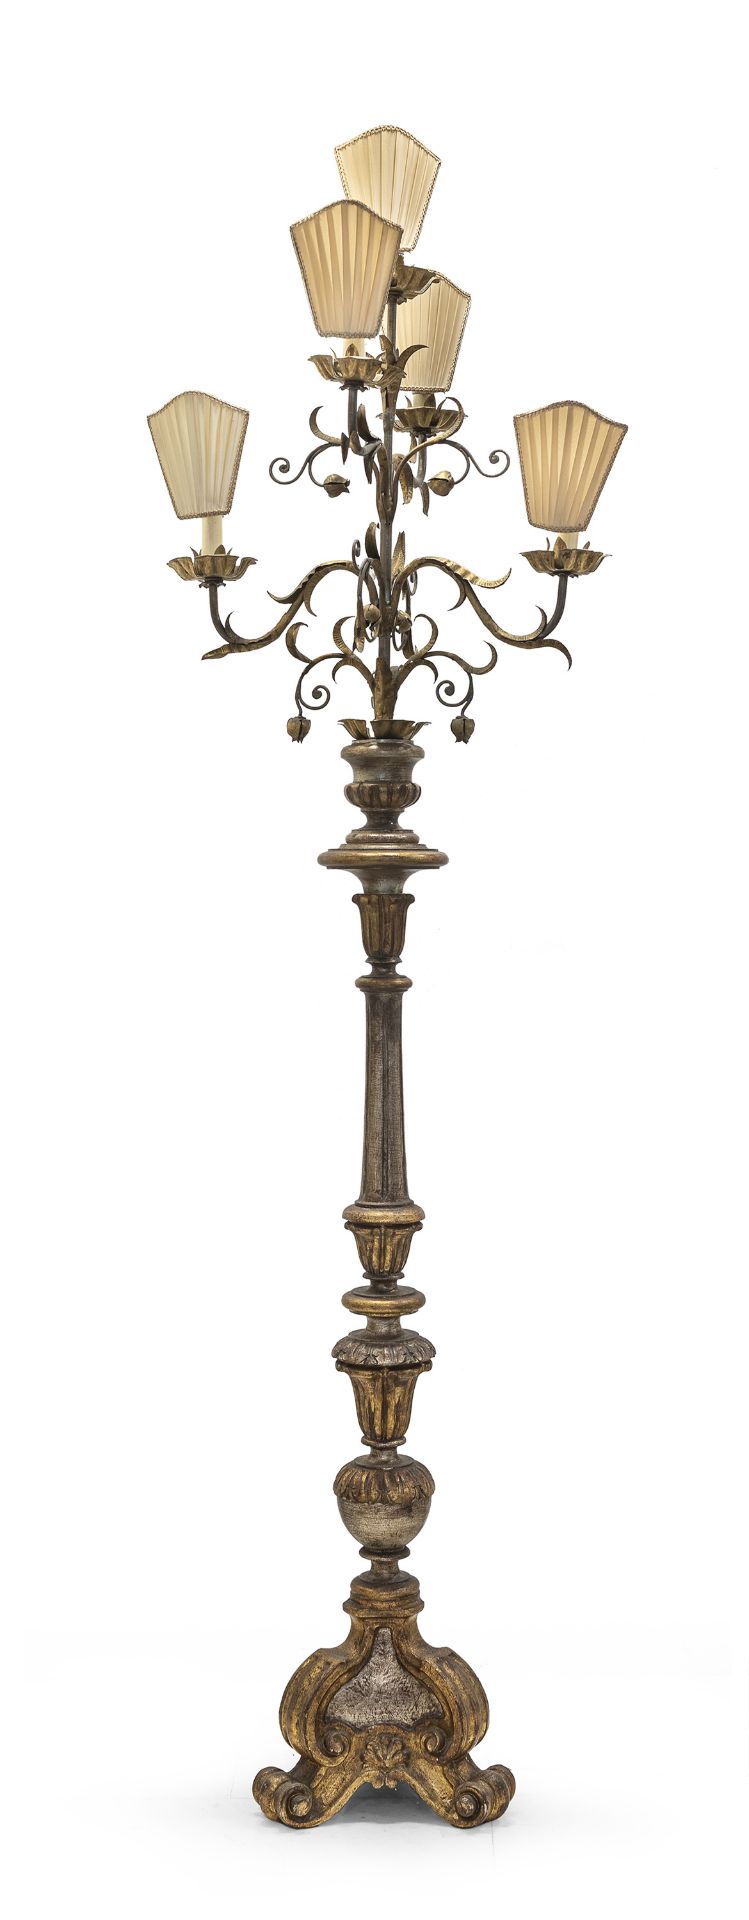 FLOOR CANDELABRA IN GILTWOOD 18TH CENTURY STYLE